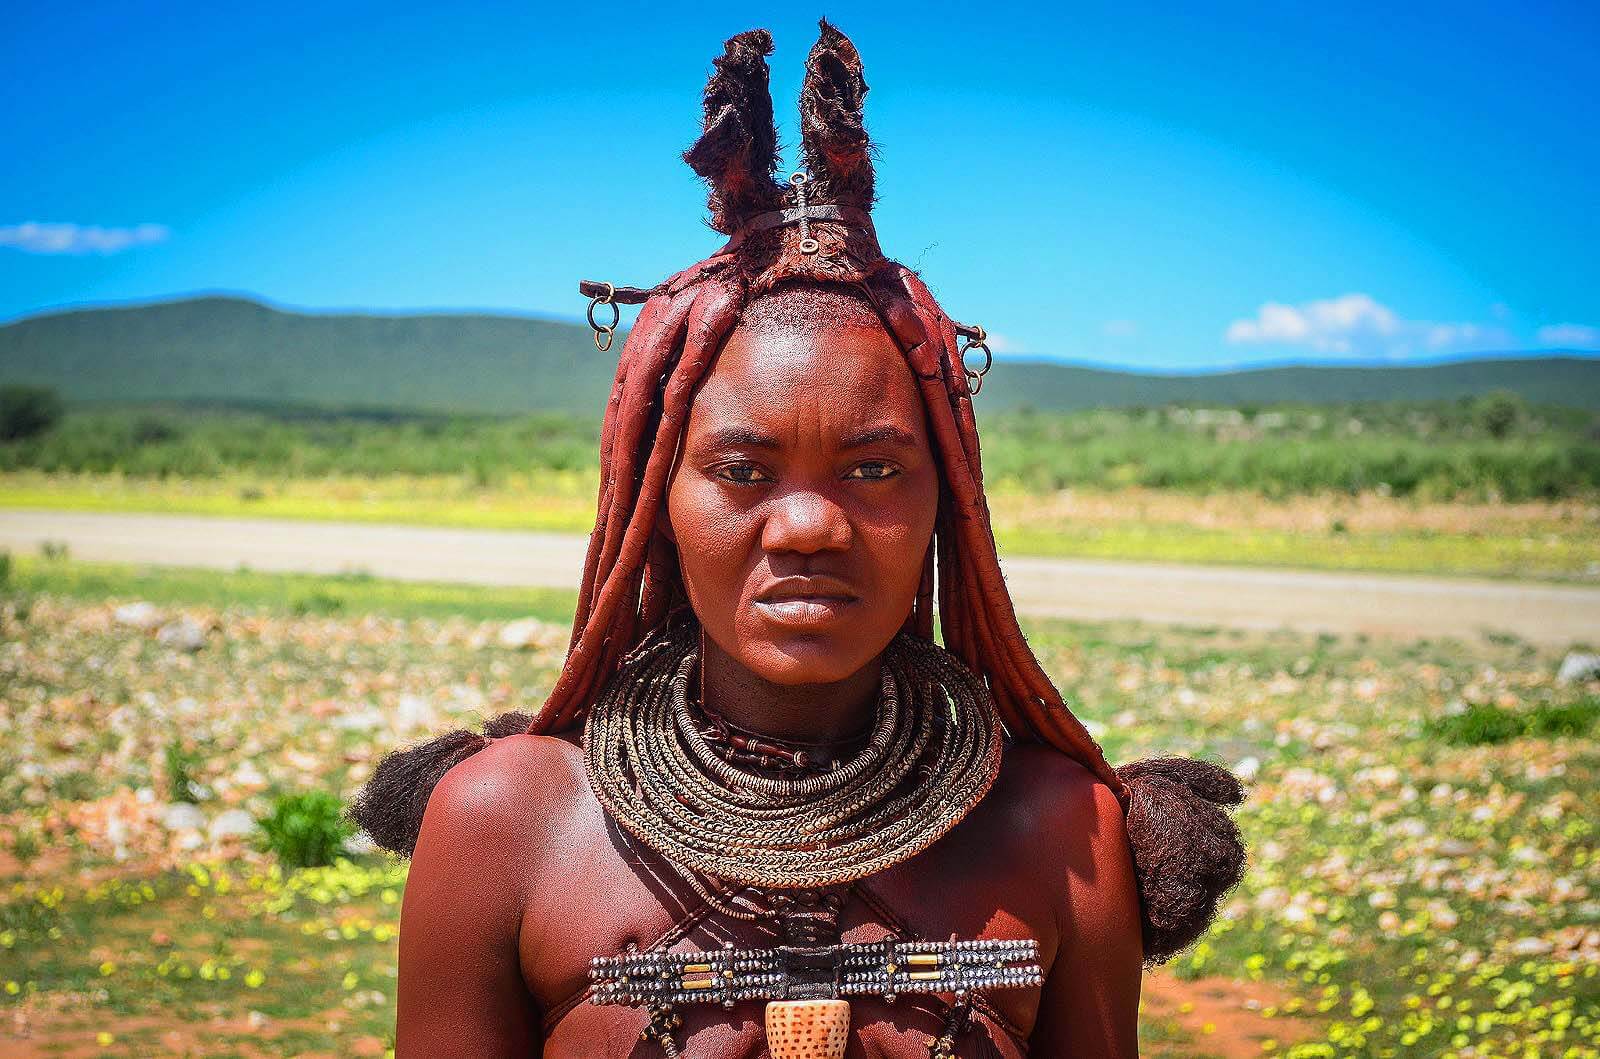 Unique fashion of Namibia's red women - Himba (Pictures)